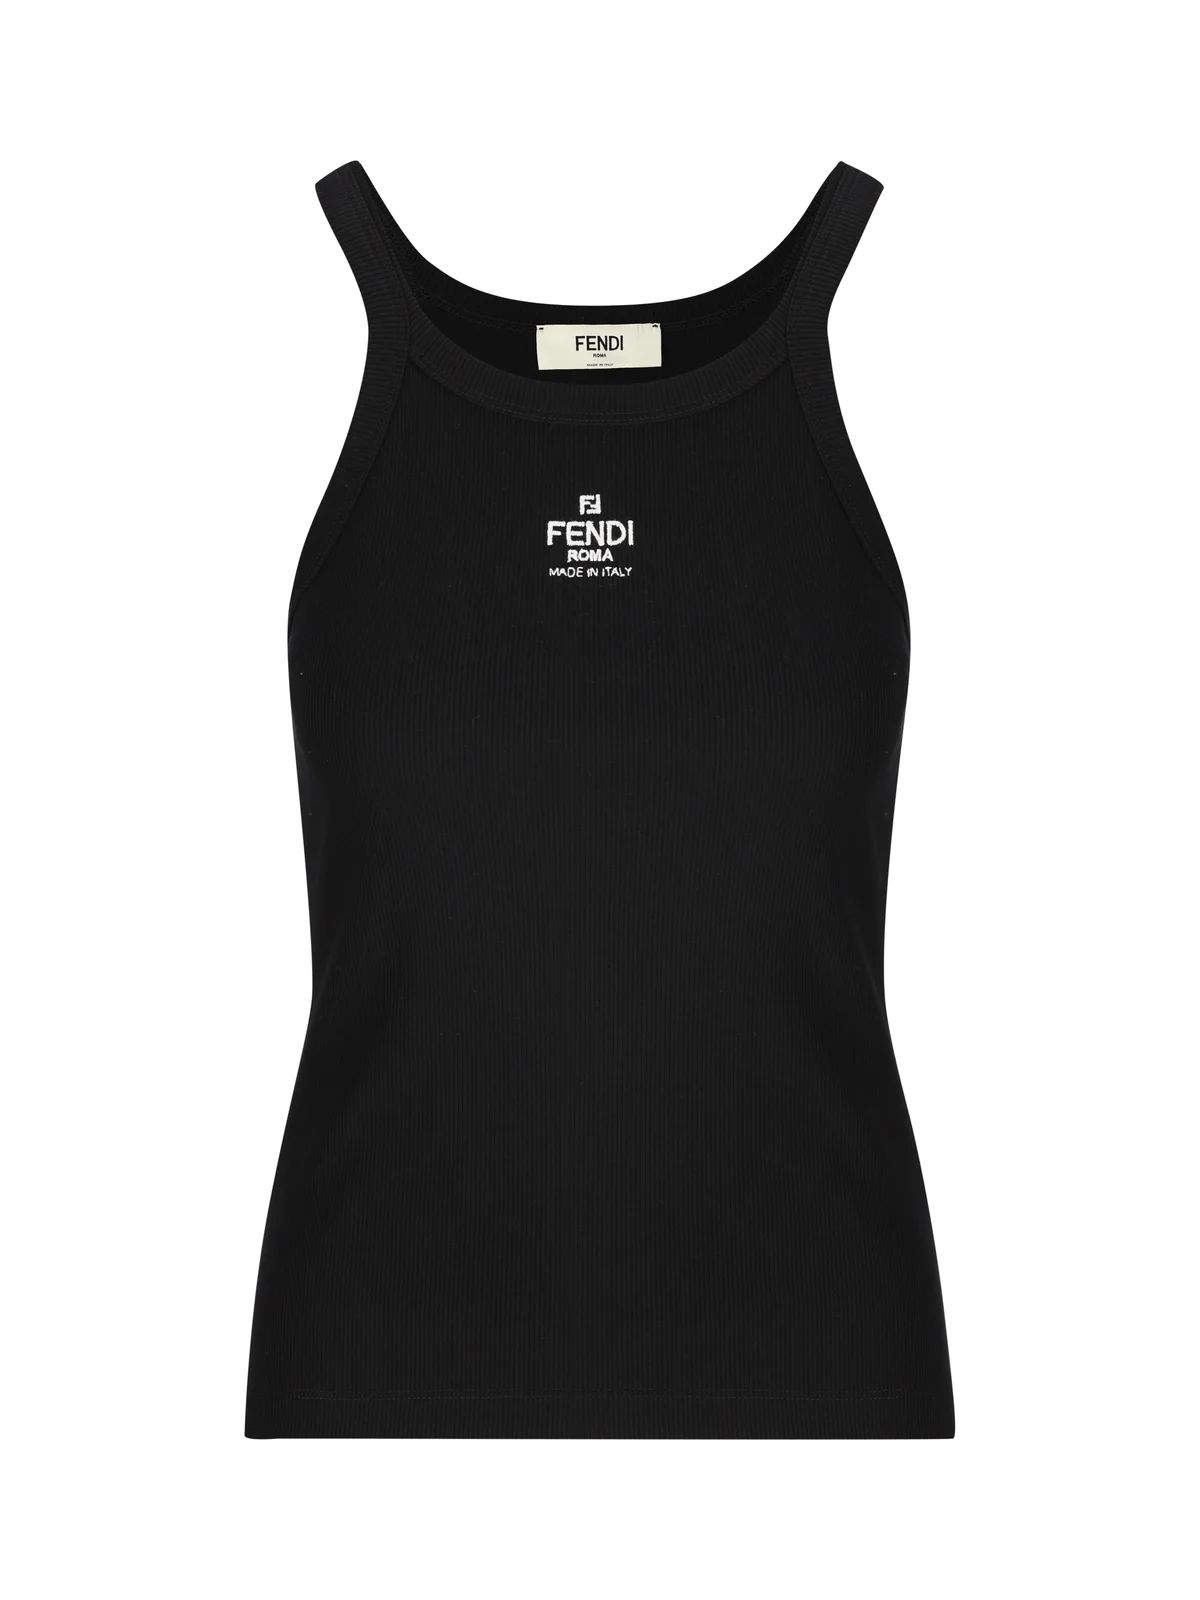 Fendi Logo Embroidered Knitted Tank Top | Cettire Global